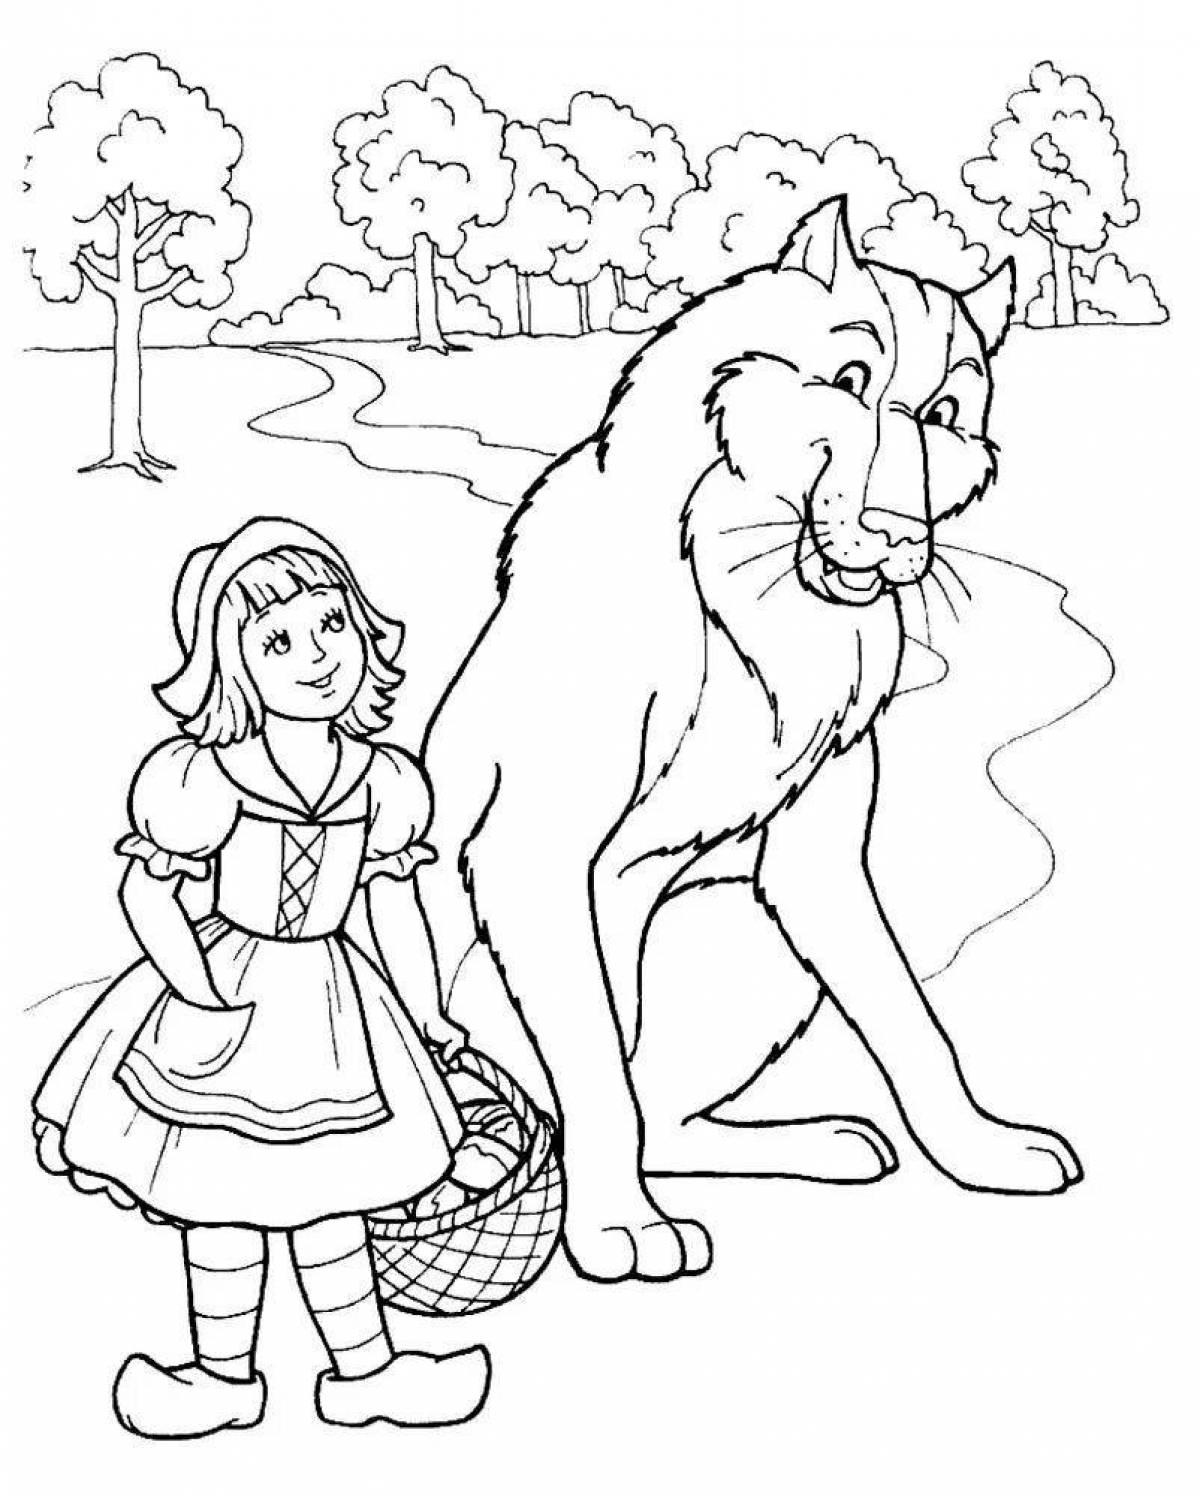 Colorful story coloring for girls